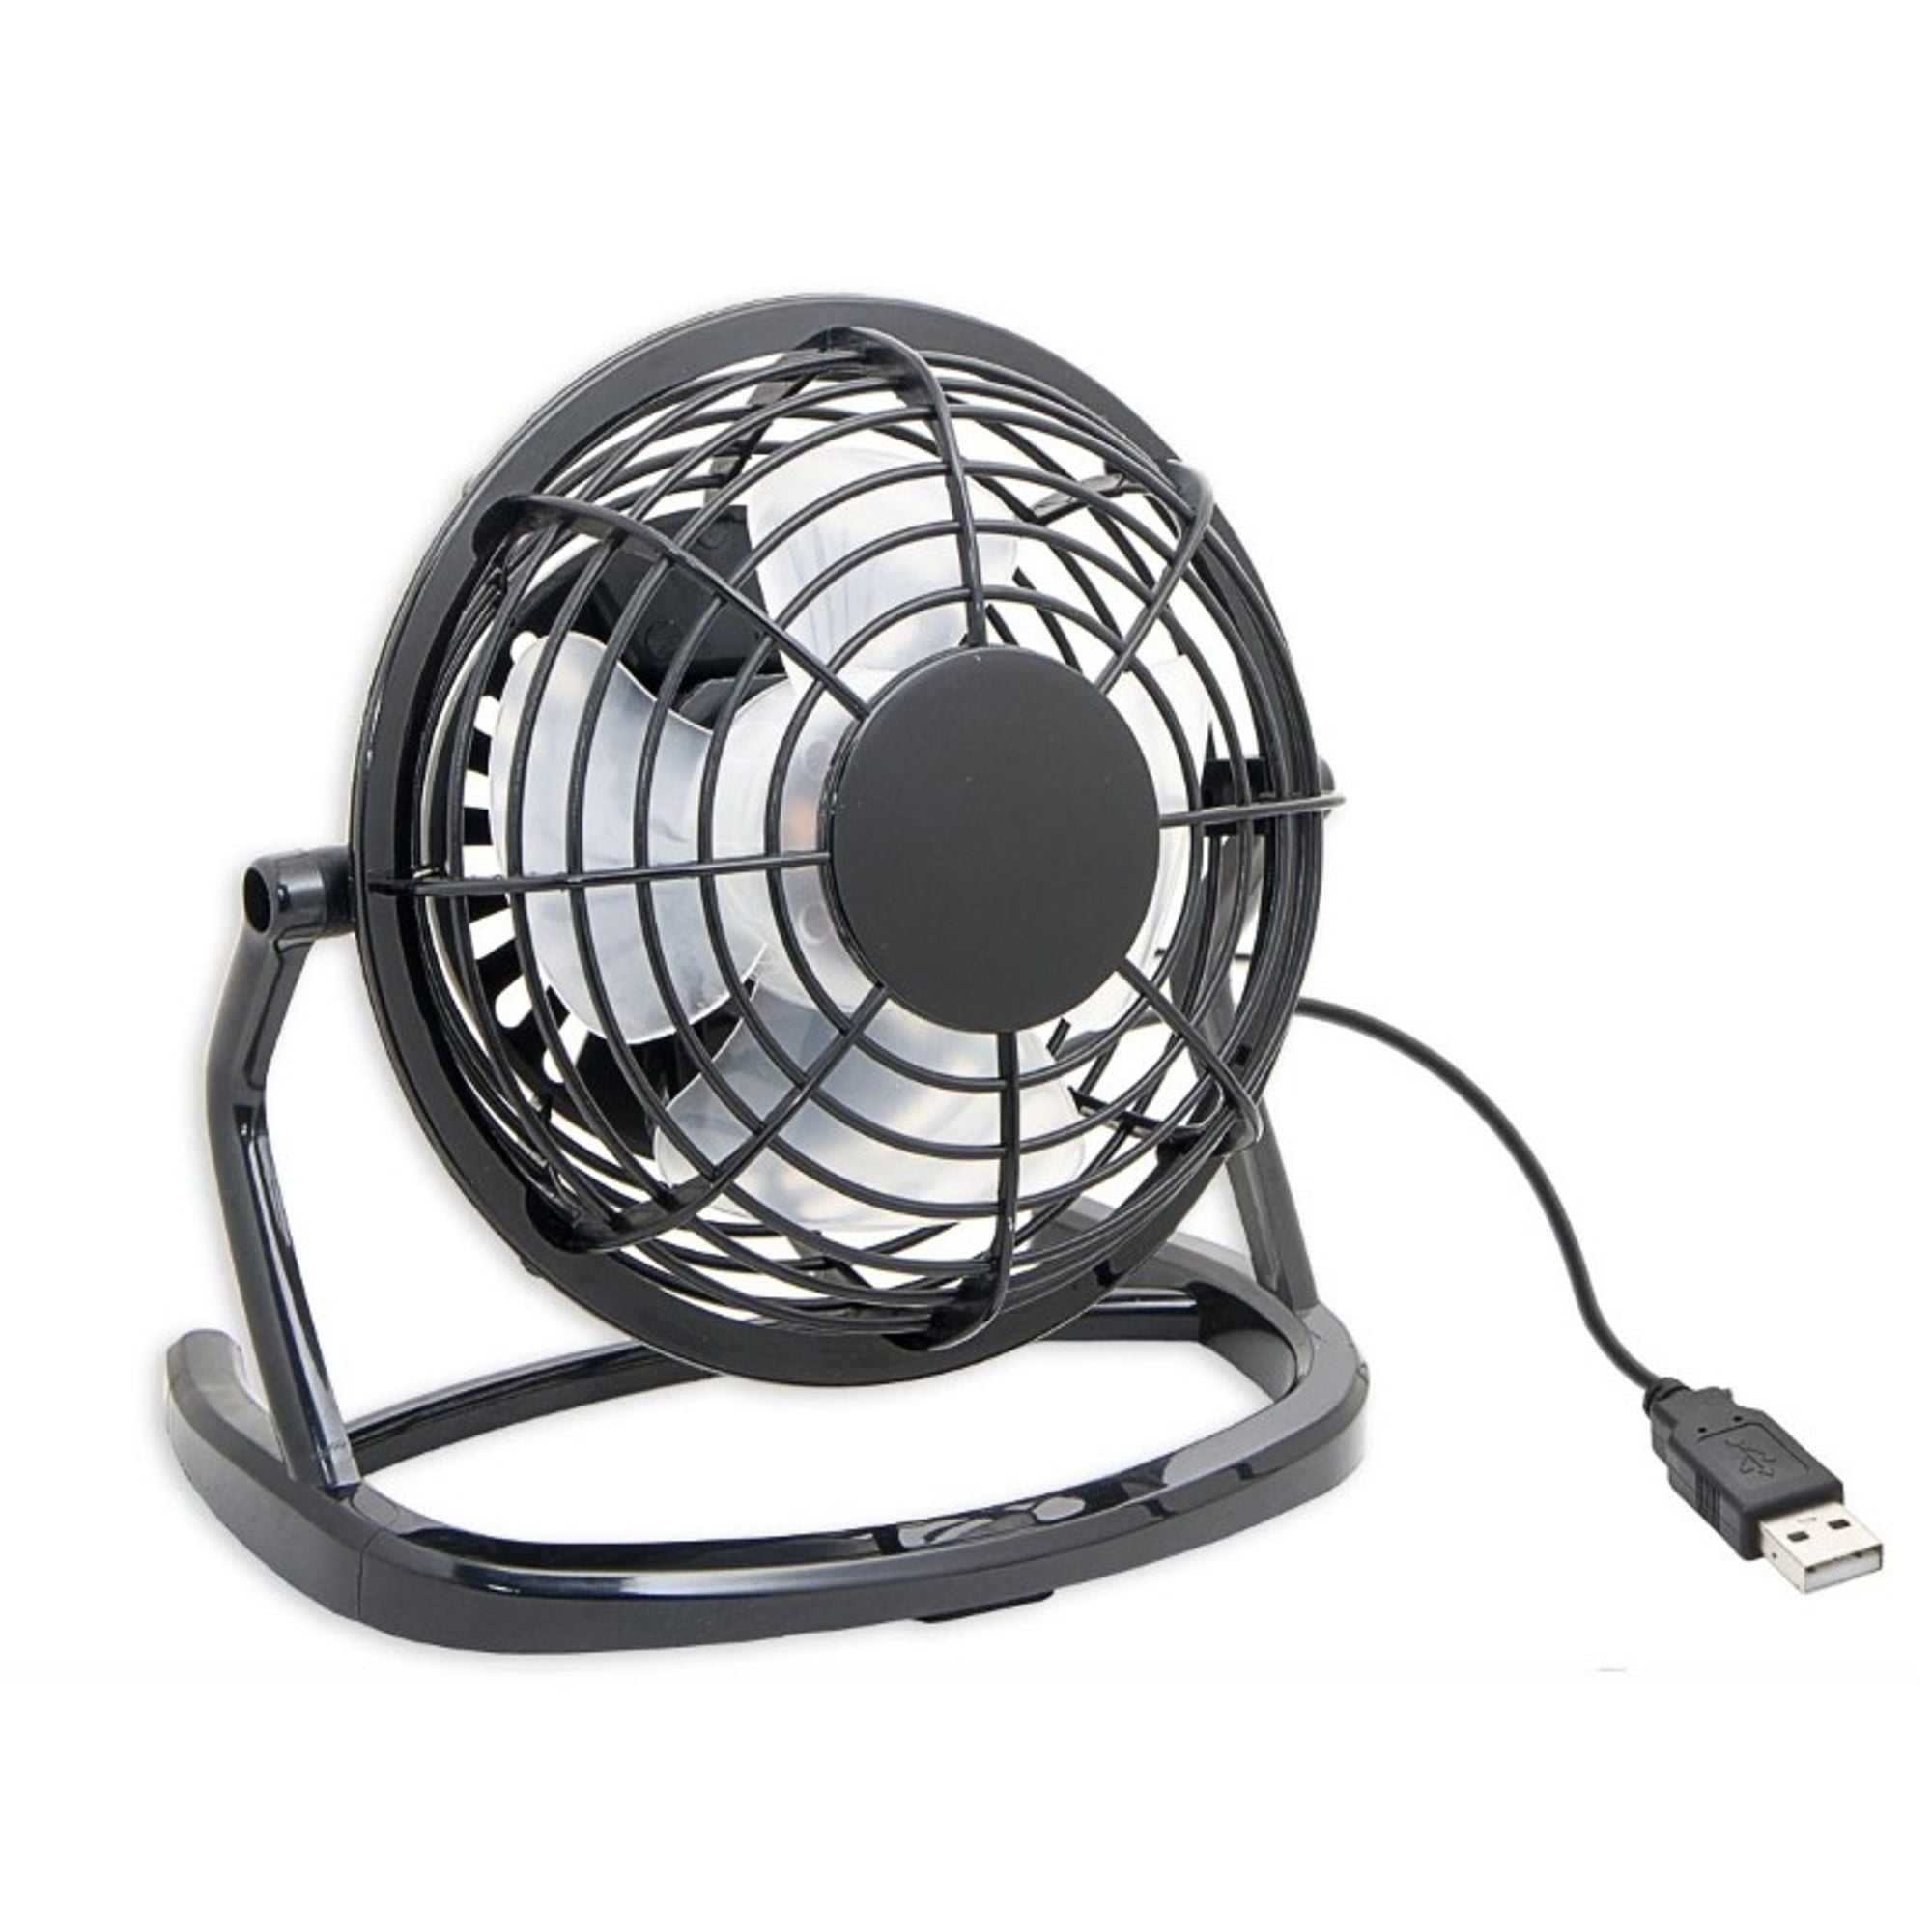 JXILY Hand Held USB Fan Desk Portable Mini Creativity Personal Fan Electric Fast Charging Silent Suitable for Home Sleeping Office Leisure Outdoor